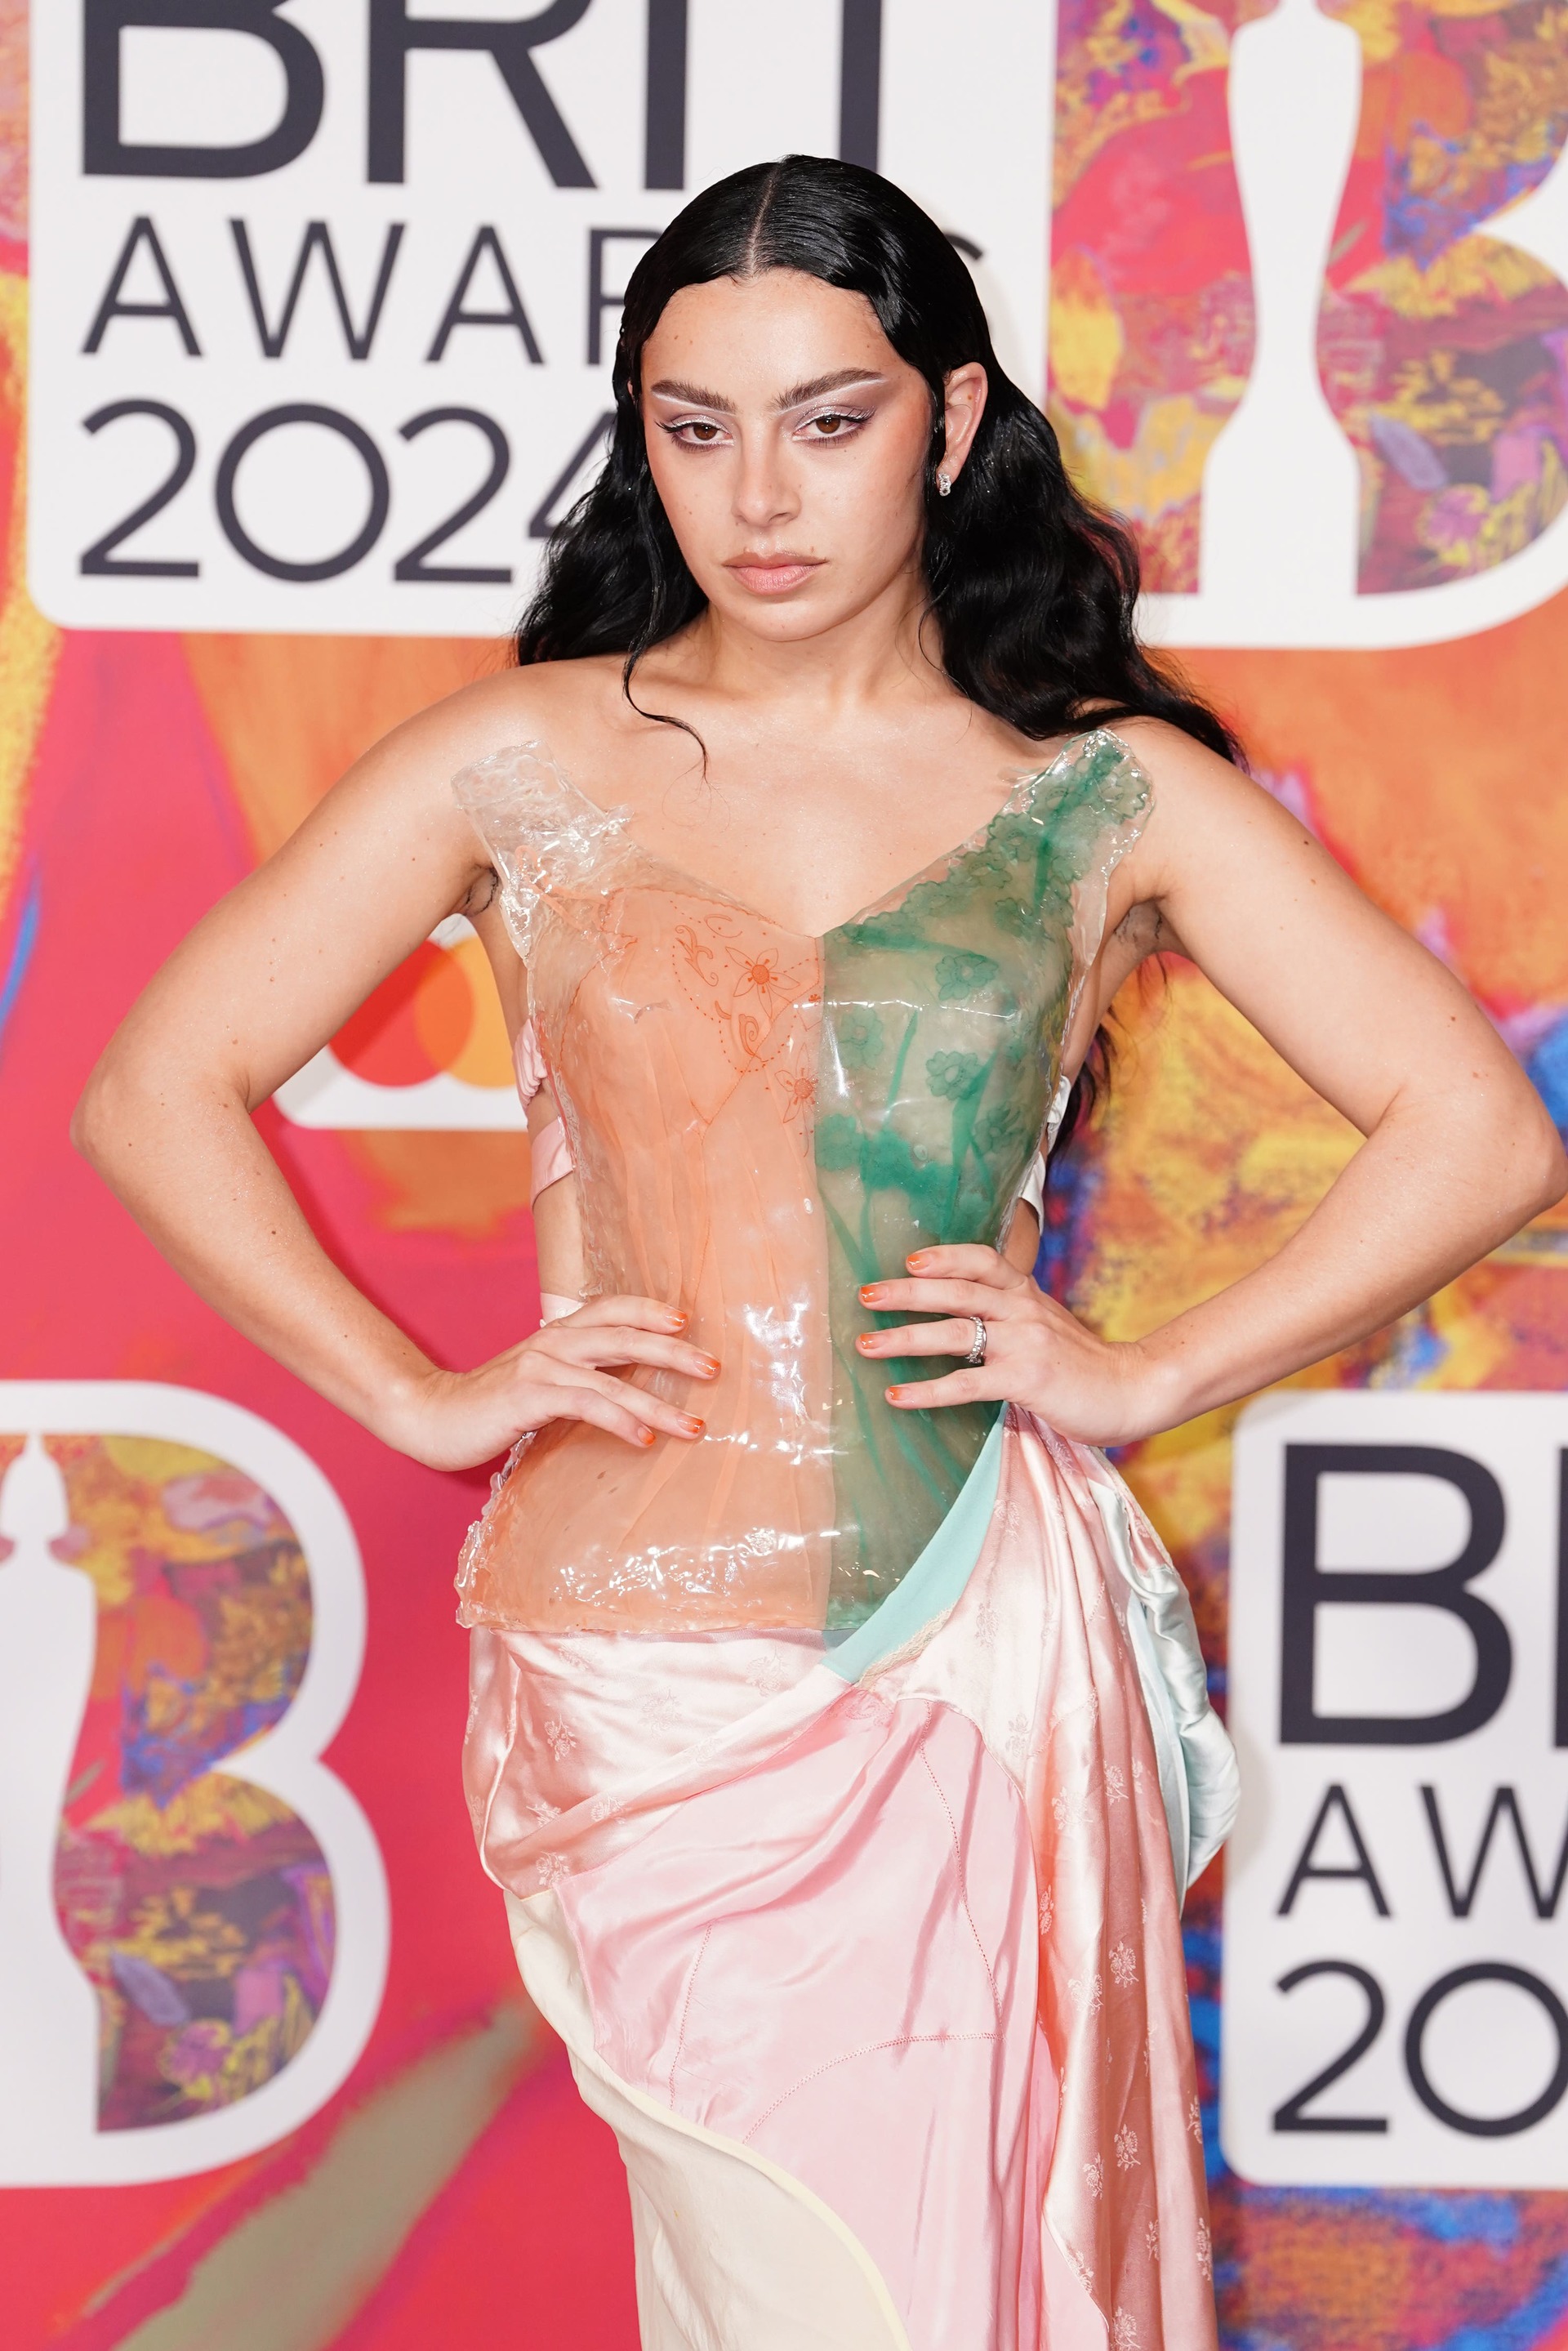 Brat by Charli XCX has debuted at number two.